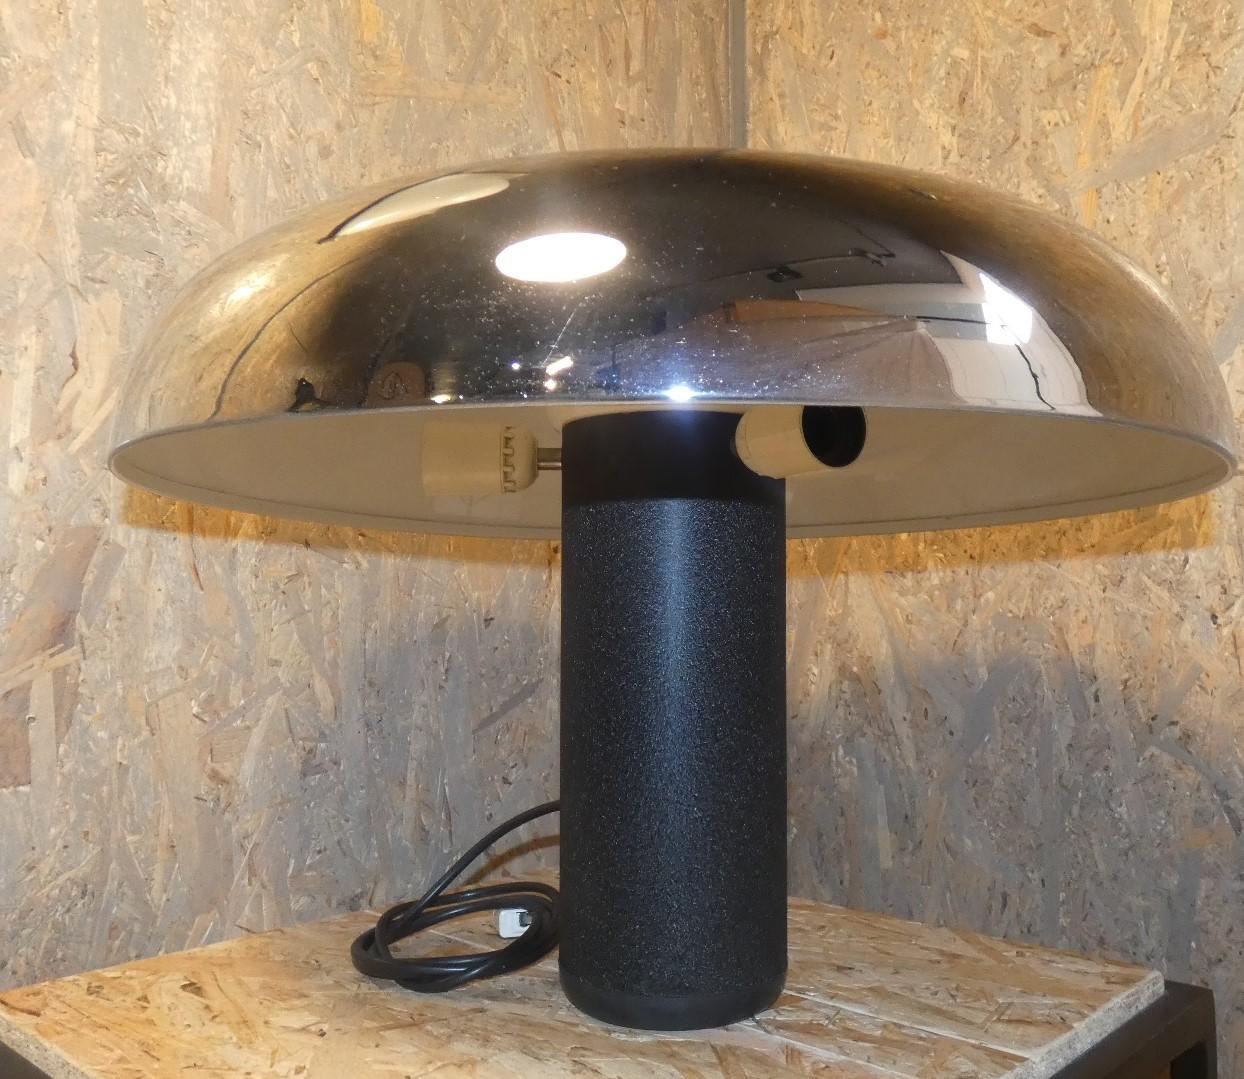 Circa lamp, produced in the 1970s by Lumenform . The prominent chrome-plated lampshade is enameled on the inside in ivory,  has pressure ignition on the top through the  large black button. The column base has a heavy weight and is made of black